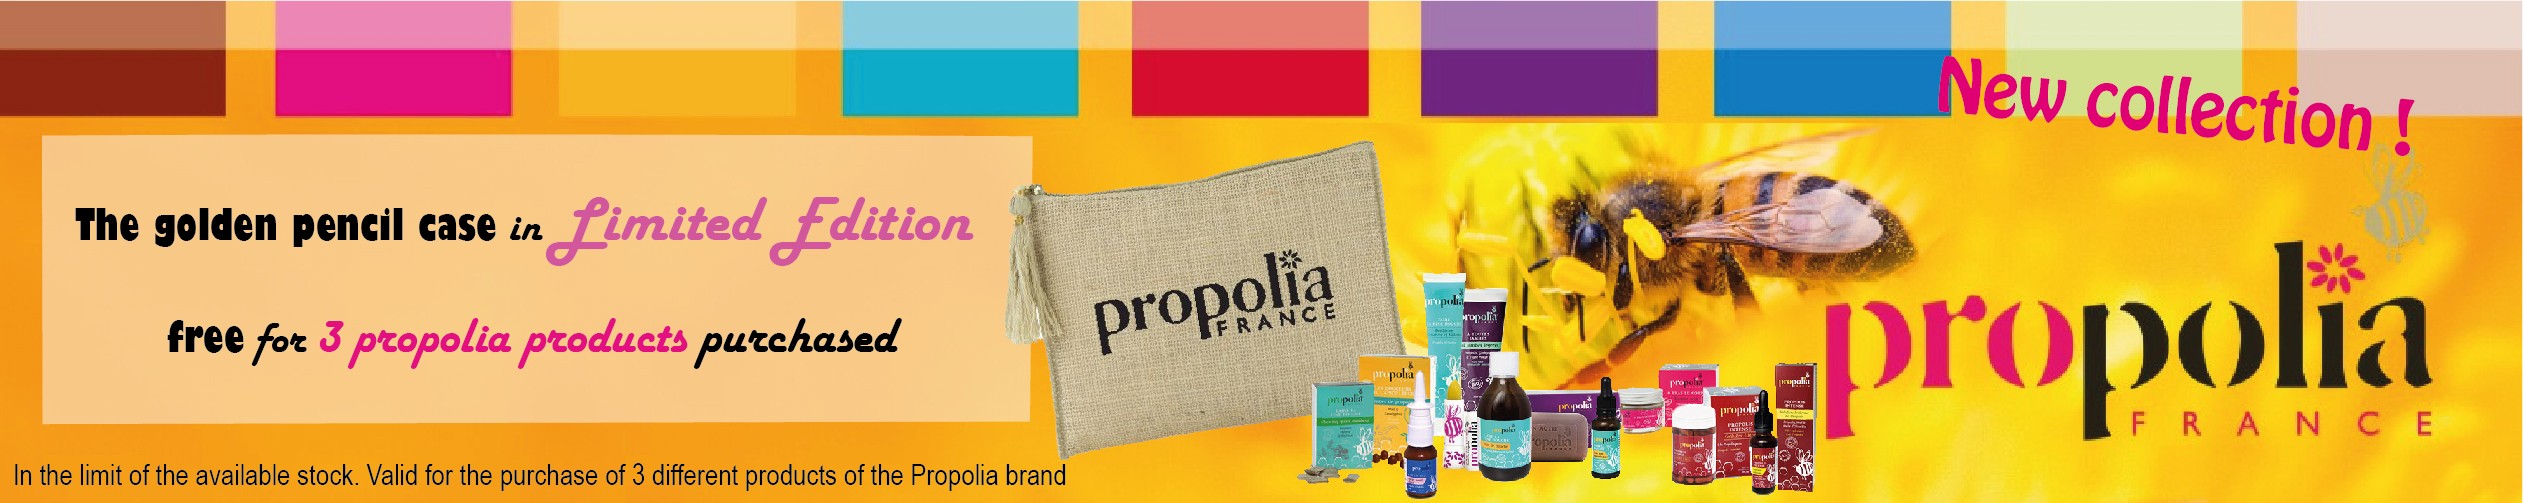 Propolia's products offer